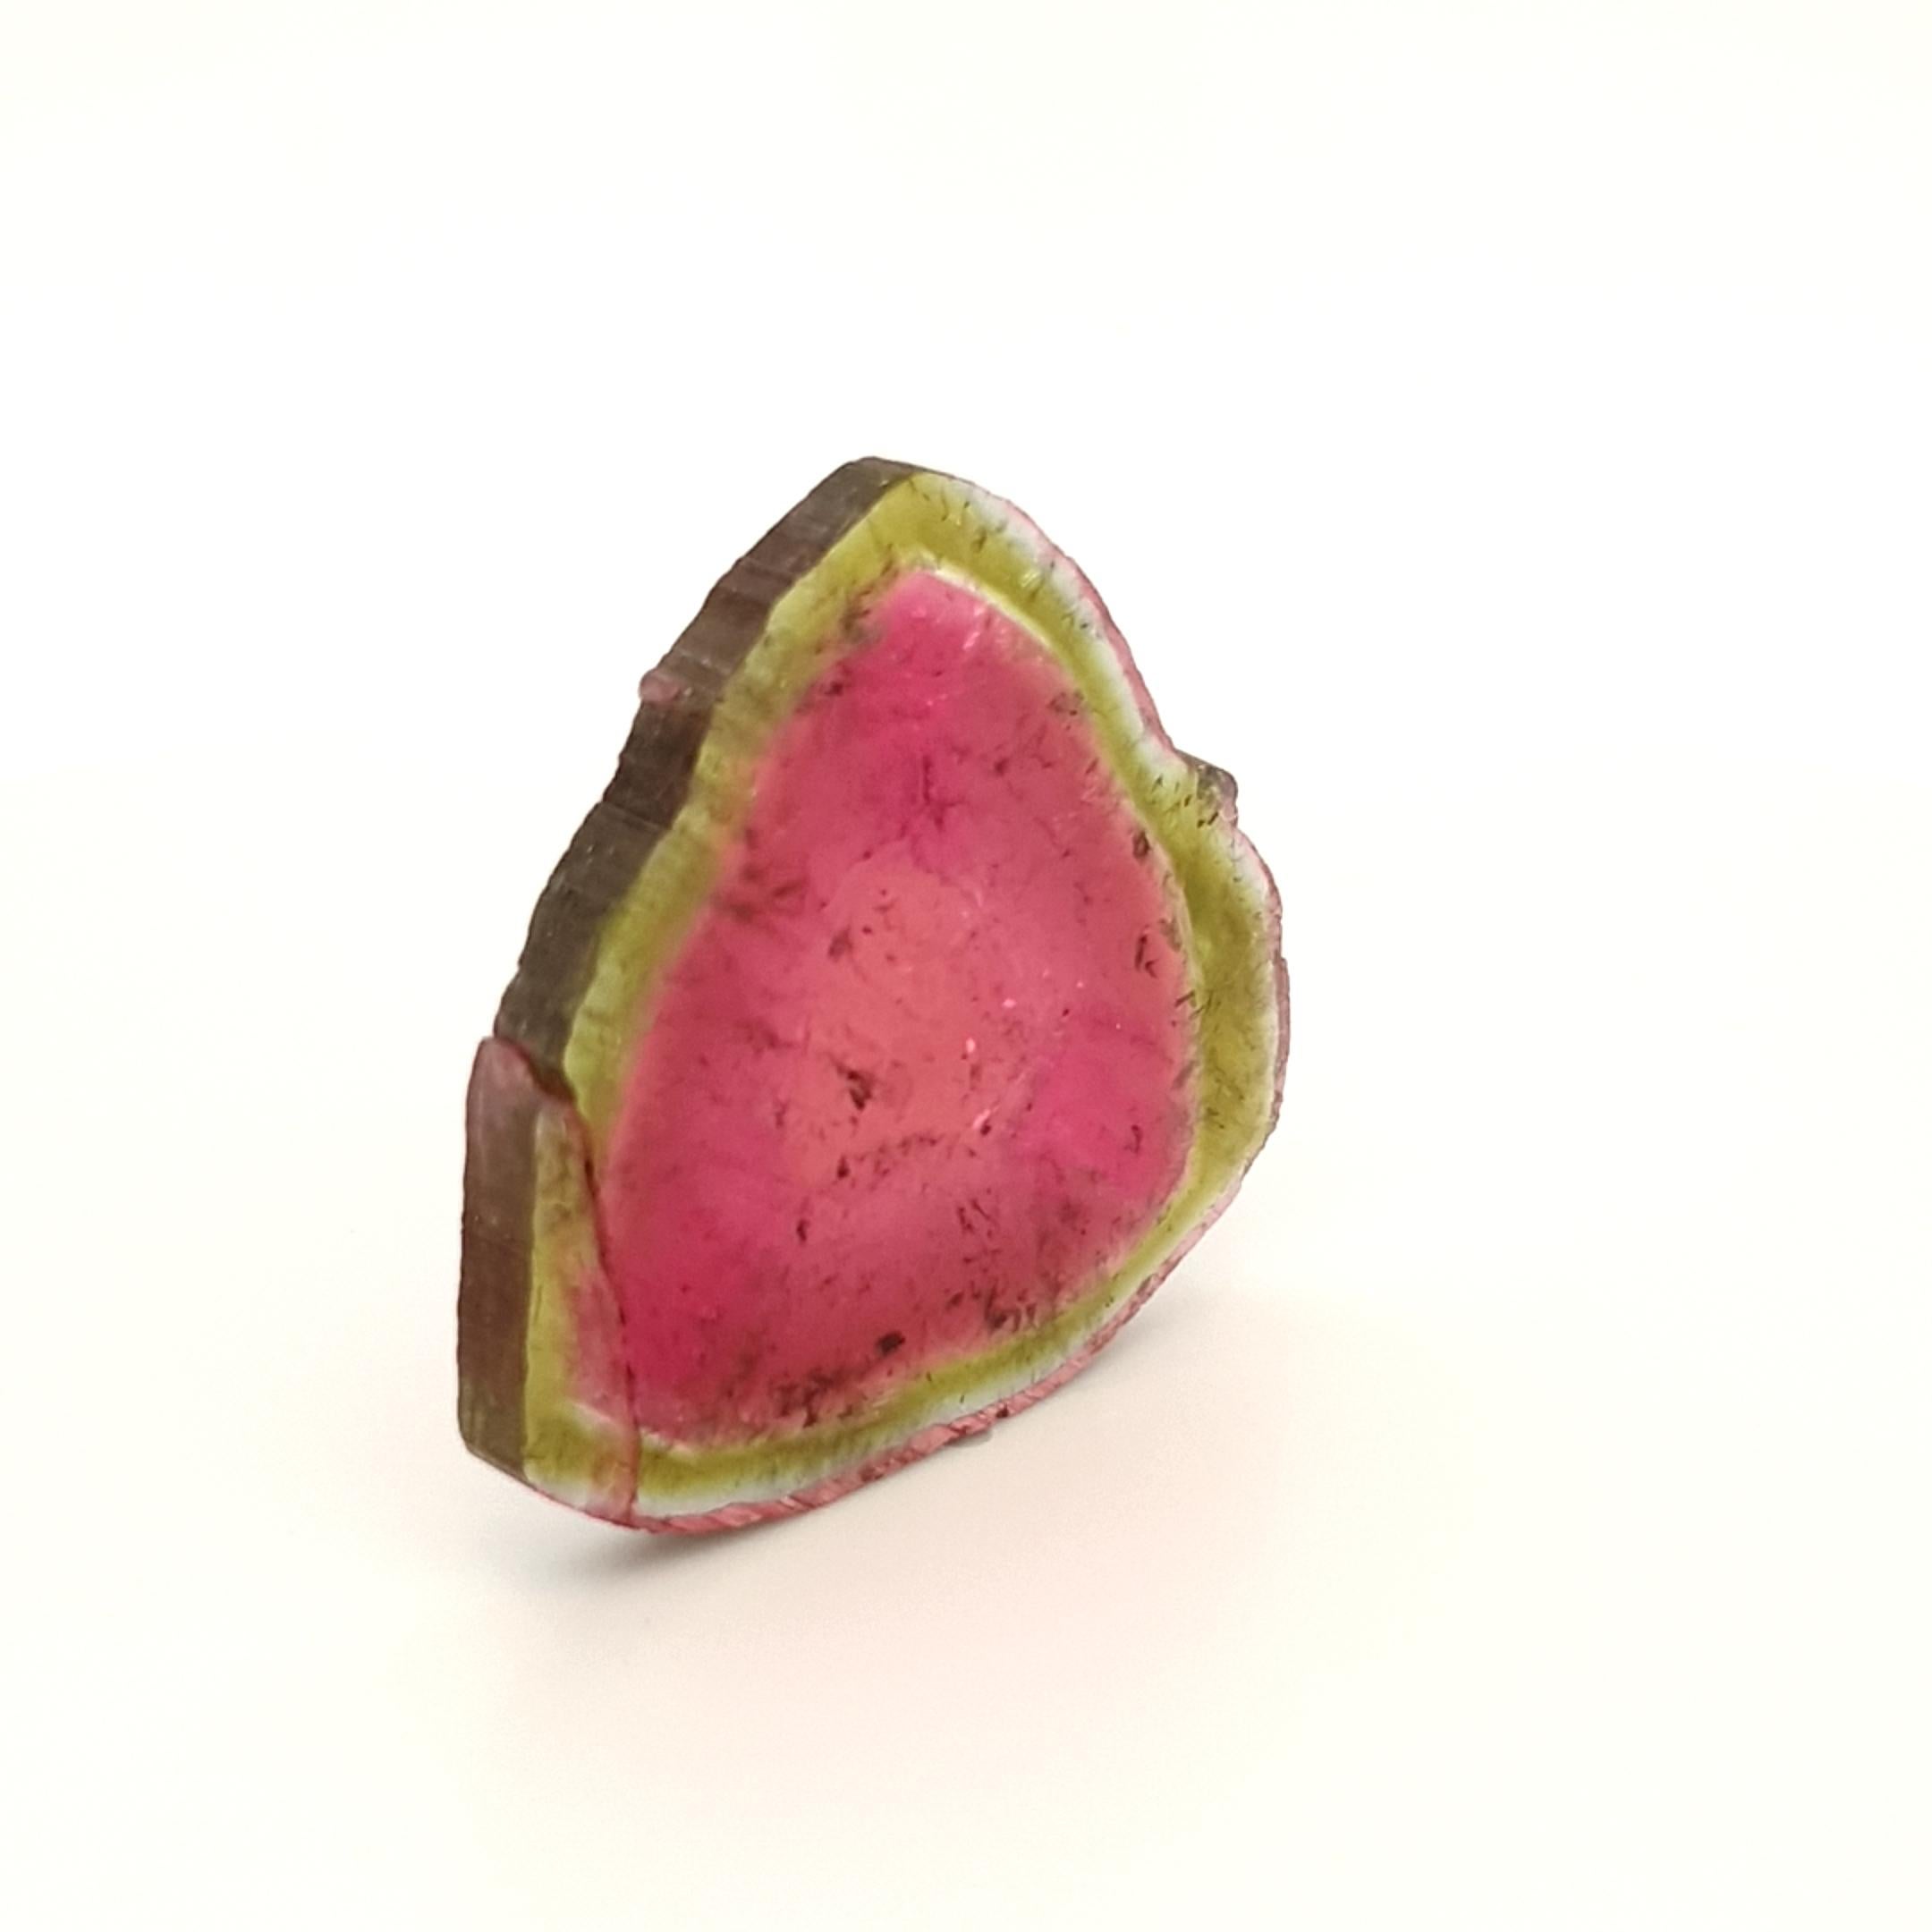 The tourmaline slice shows a typical pattern for a tourmaline watermelon from Brazil.
The core goes from pink to intense pink to a green outer band. 
nicely banded, have precise transitions and well saturated colour.
The noble quality of this piece